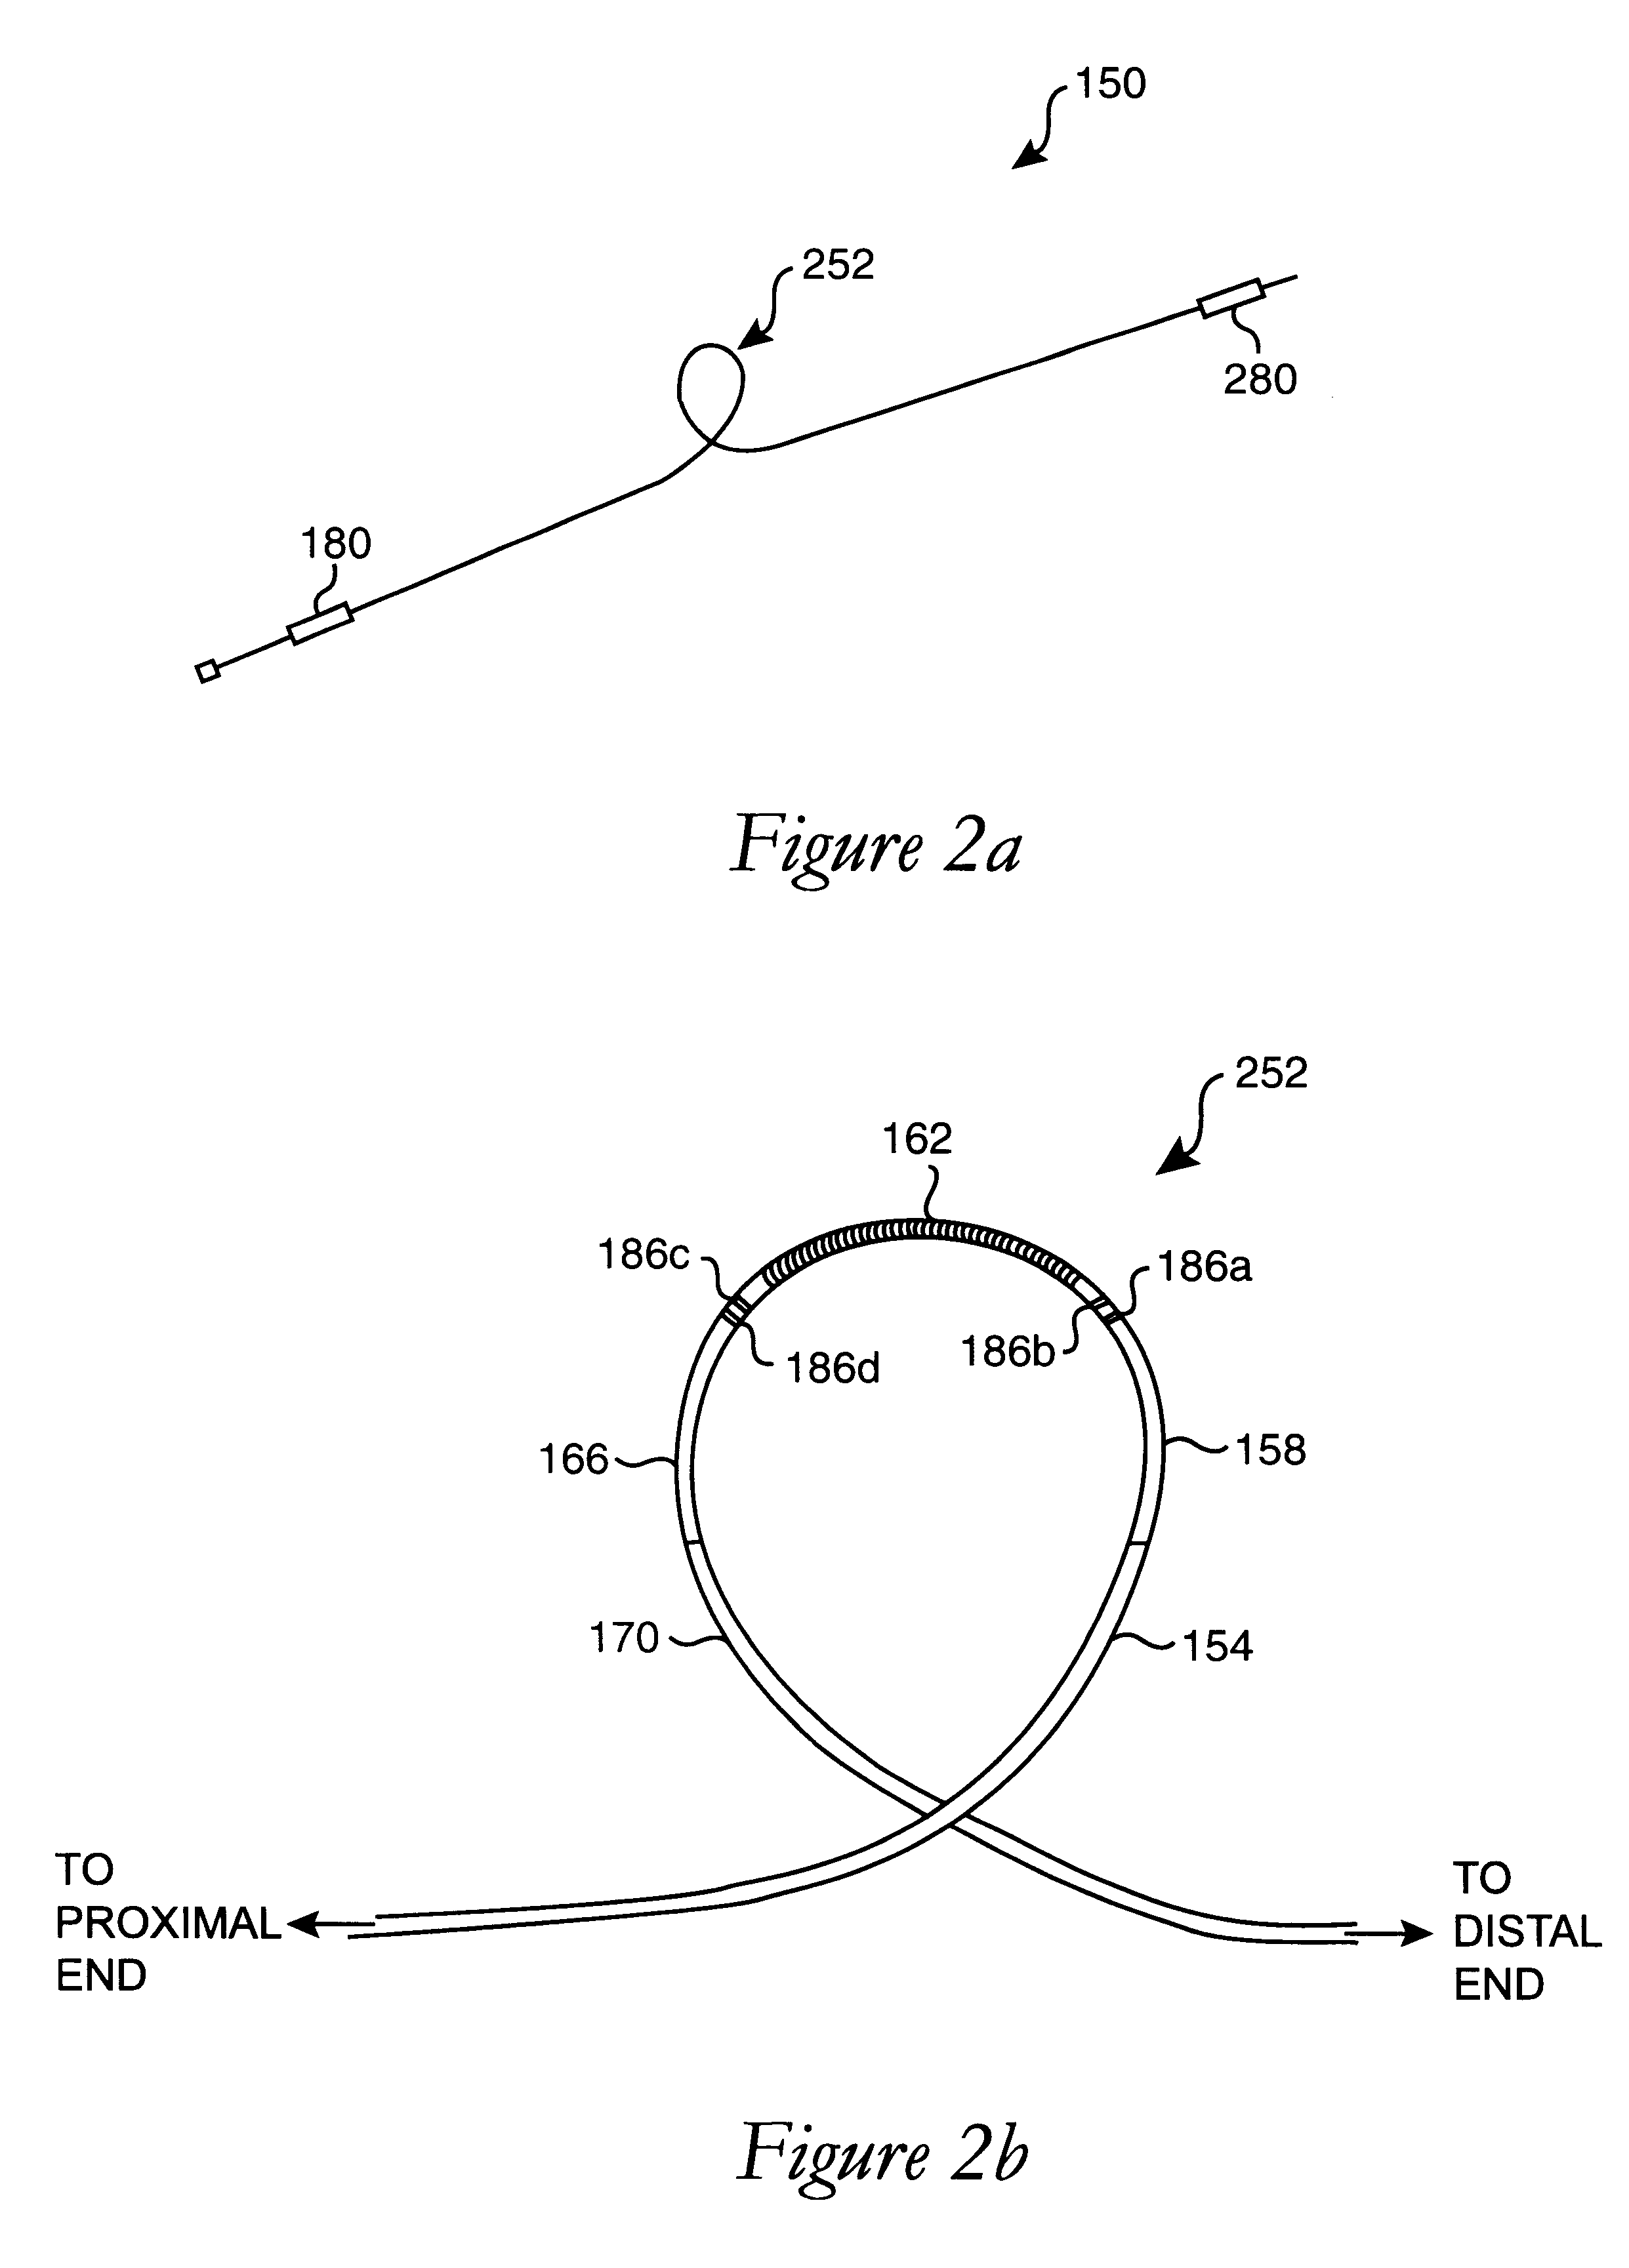 Microwave ablation catheter with loop configuration